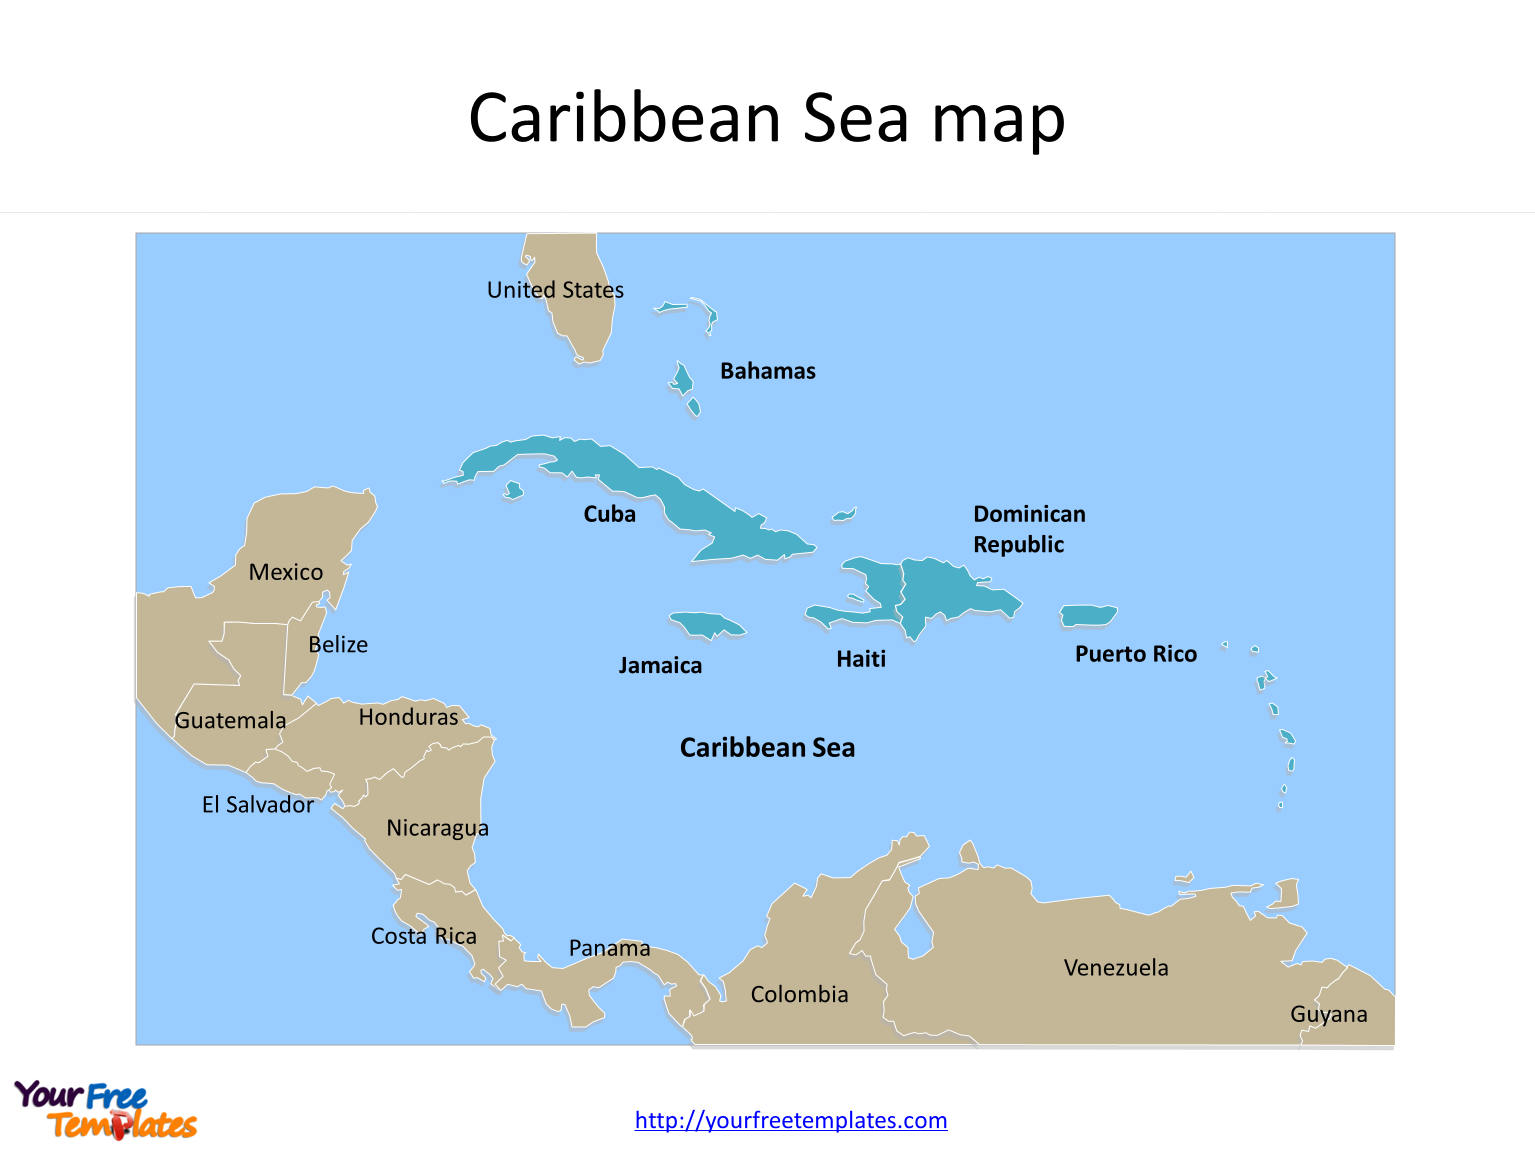 Map of Caribbean Sea with political division and major Countries labeled on the Caribbean Sea map free templates